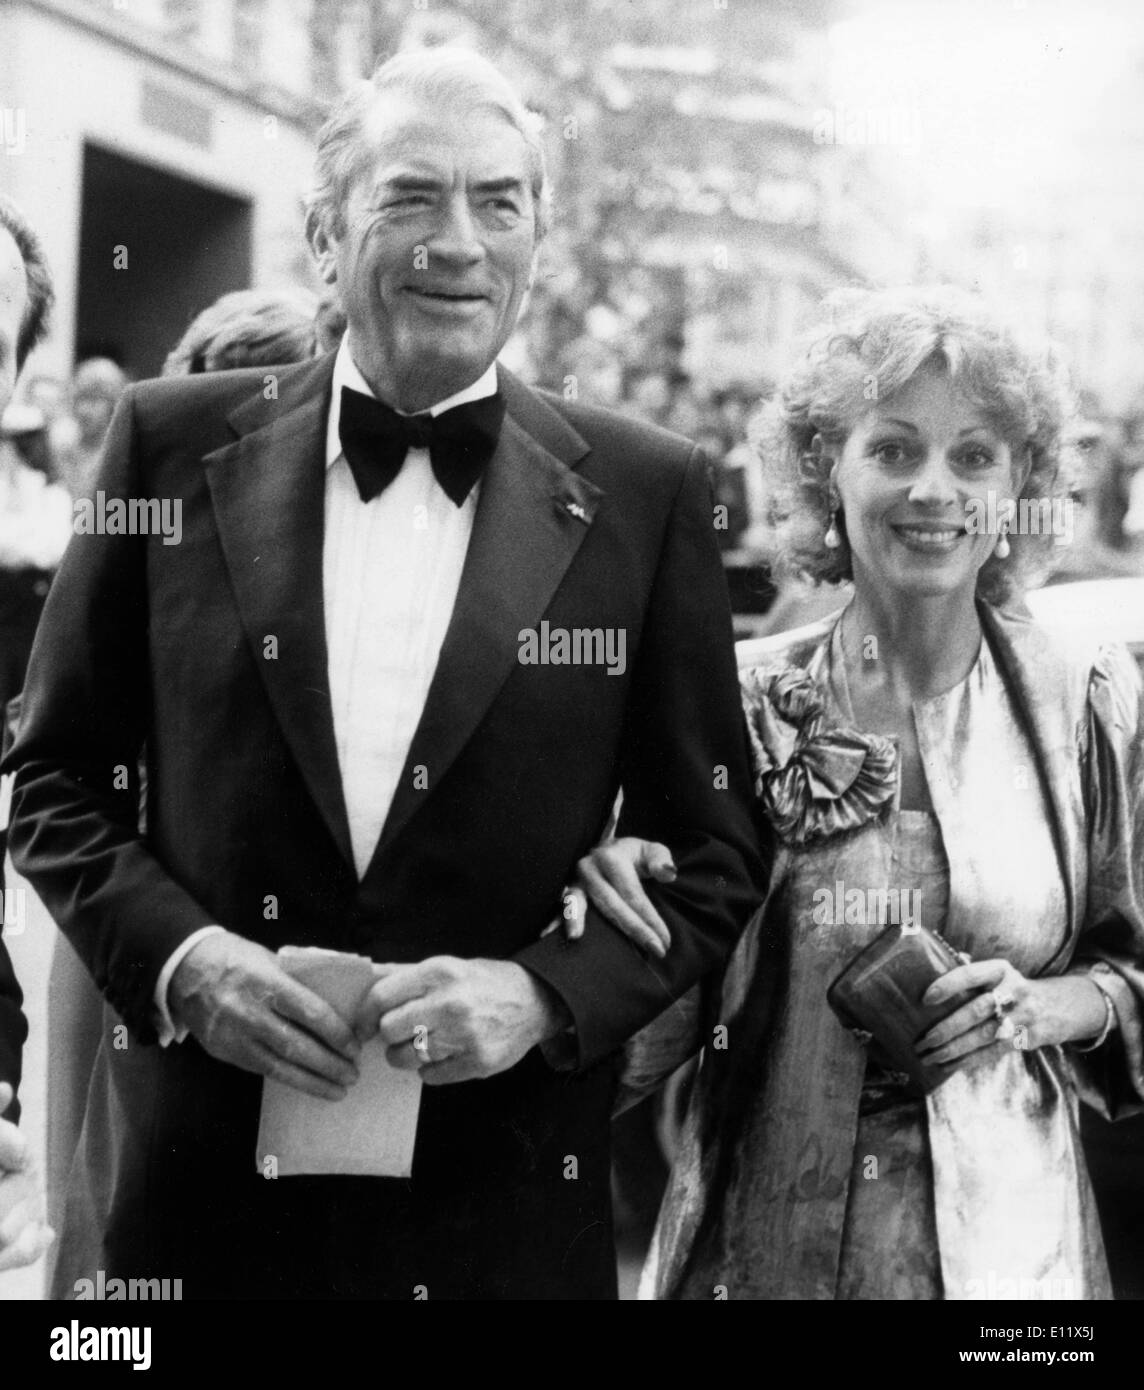 Actor Gregory Peck and wife arrive at film premiere Stock Photo